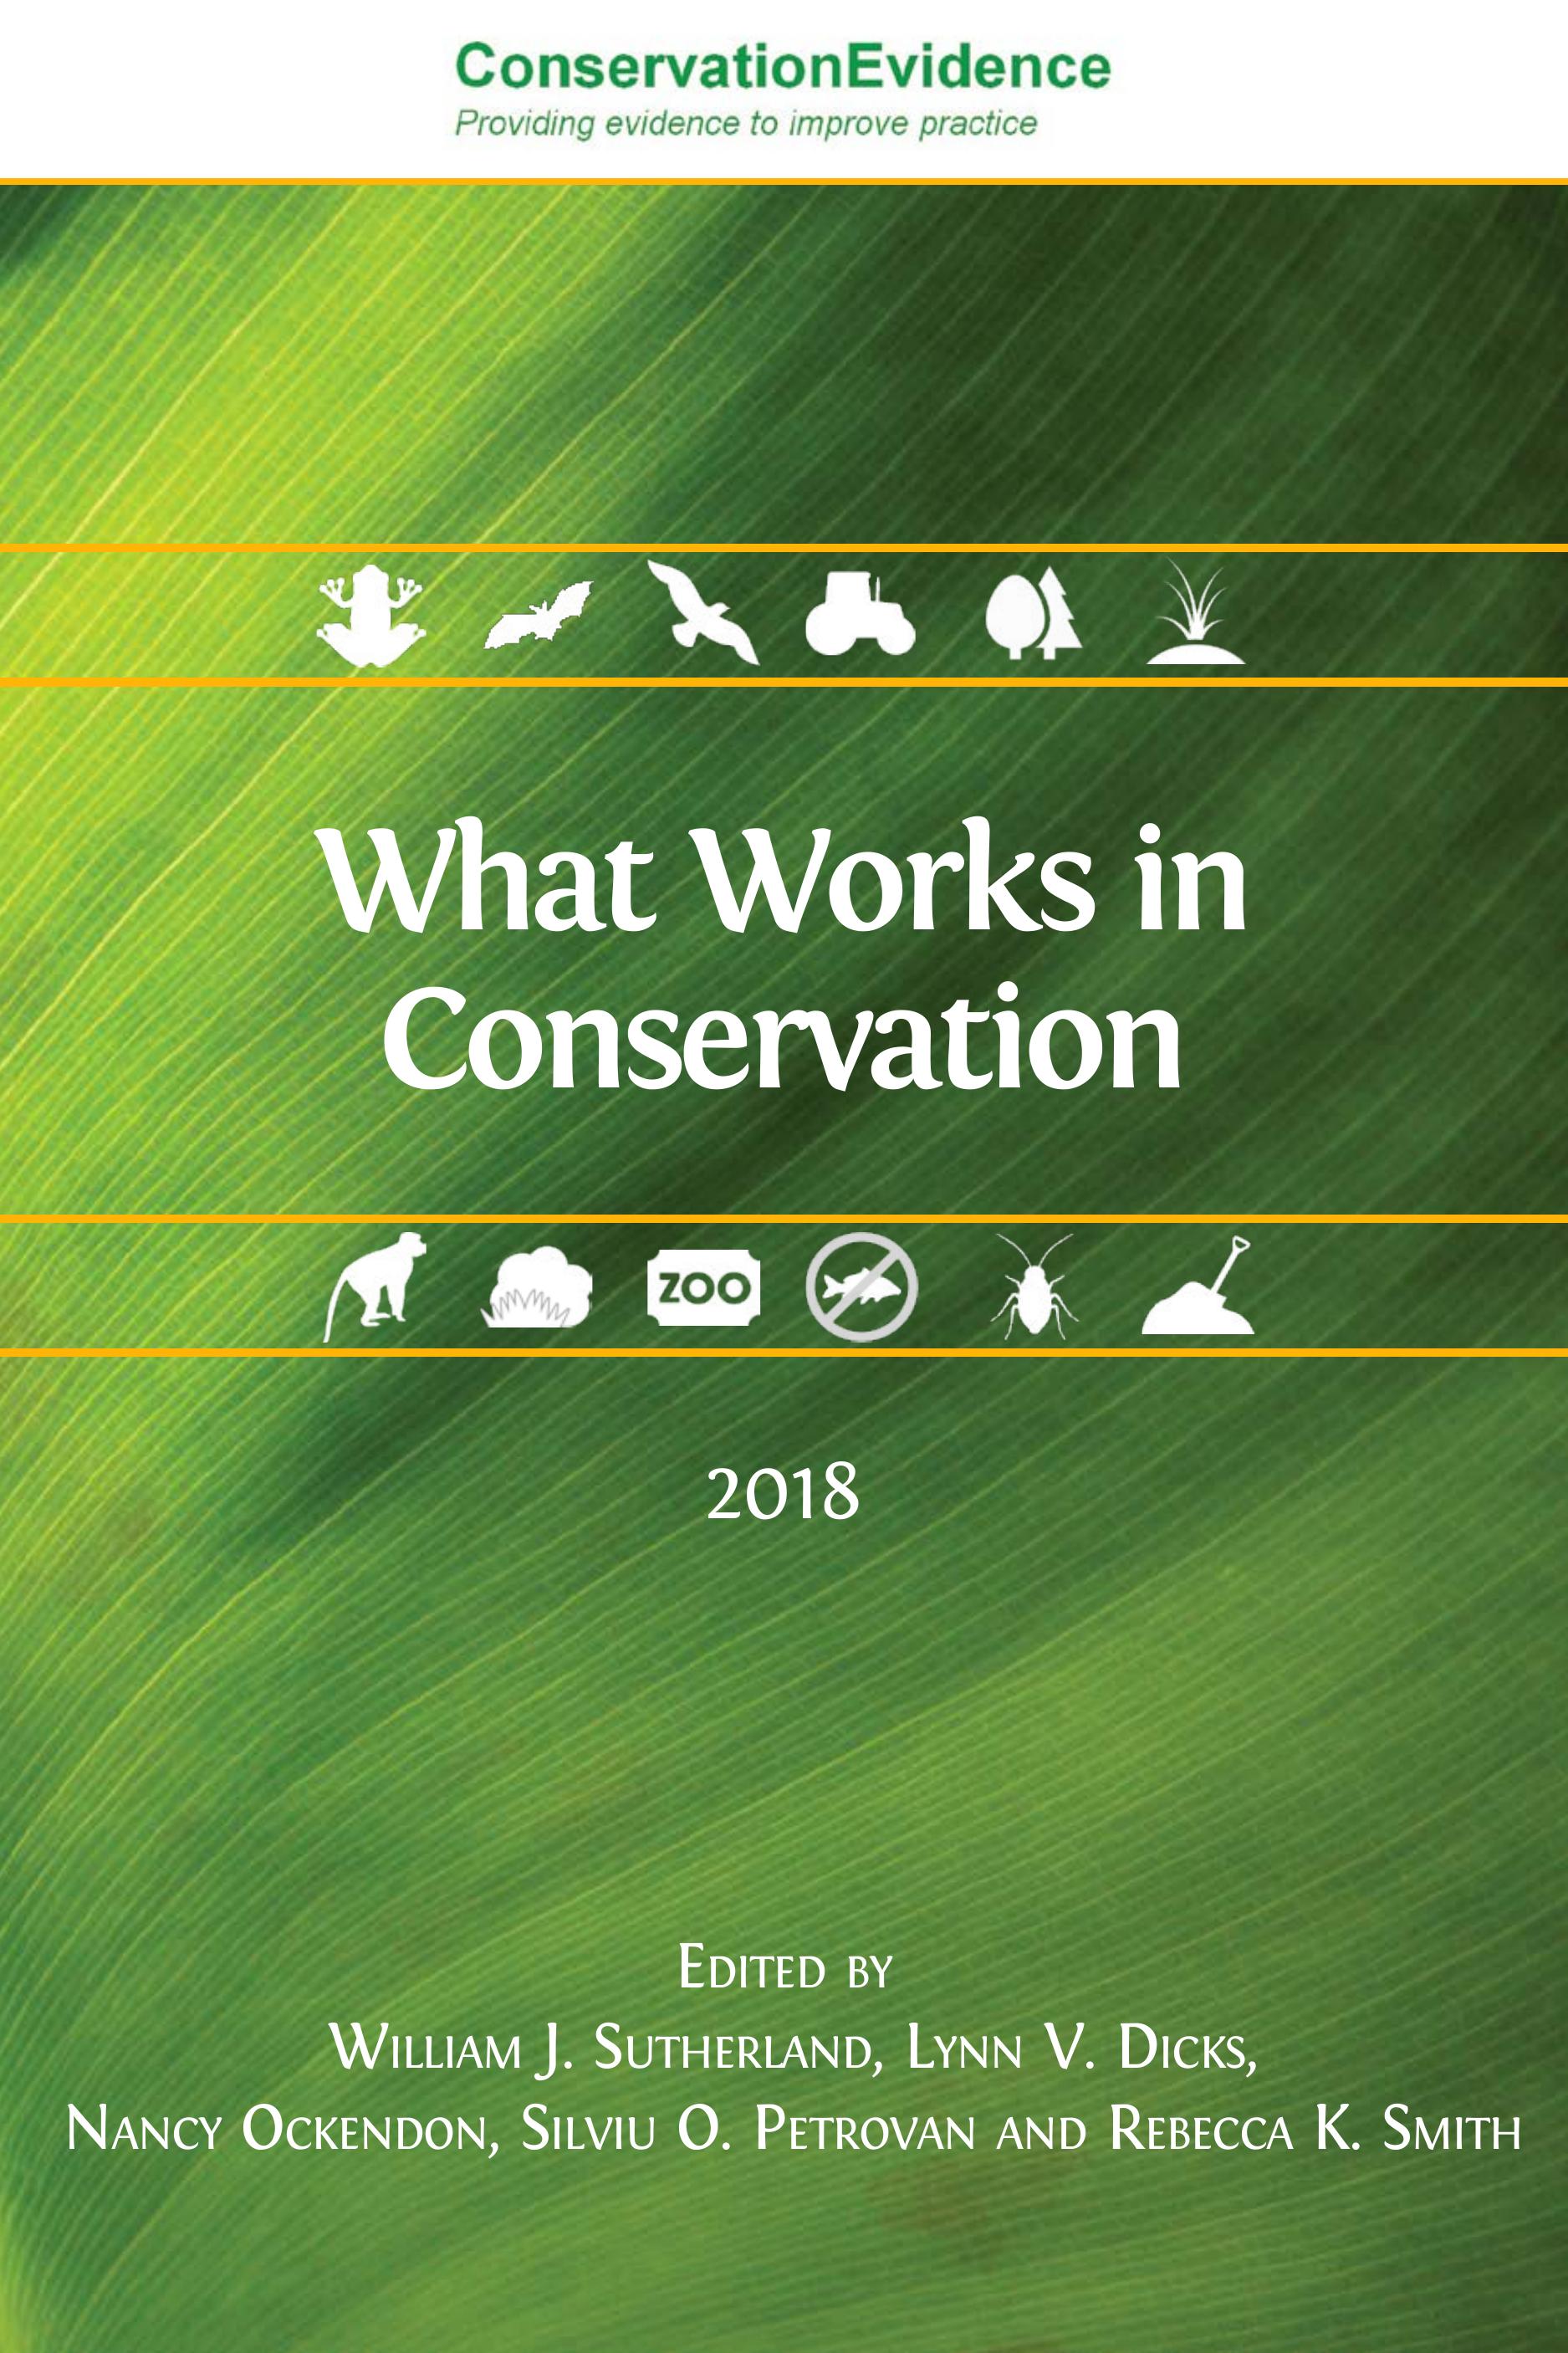 What Works in Conservation 2018 (archived)